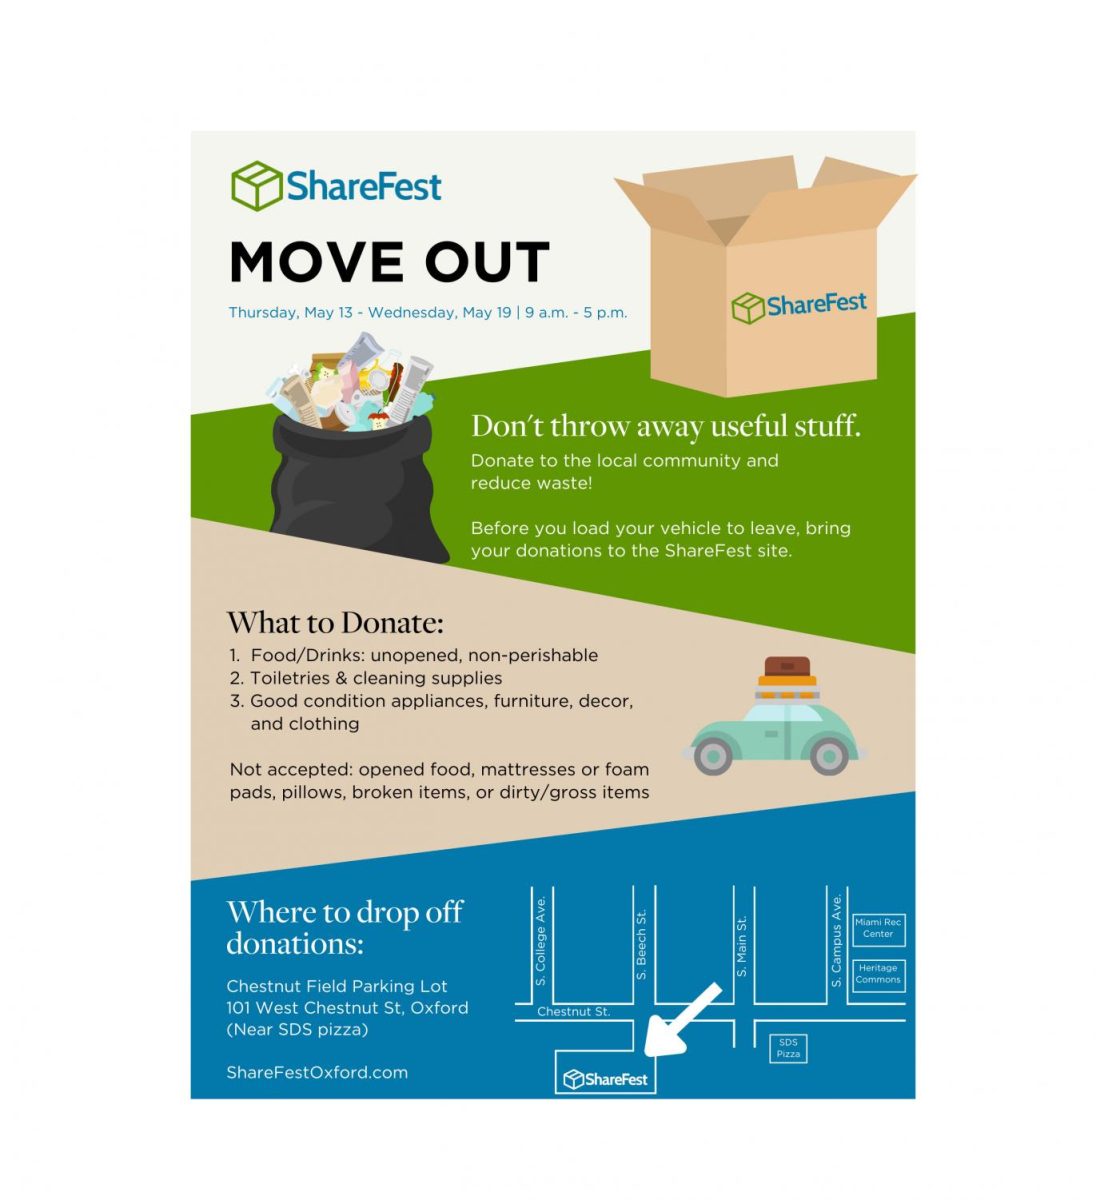 Don’t just dump your unwanted household goods and furniture at the curb when you move out of Oxford this spring. The city has several recycling and donation suggestions instead.